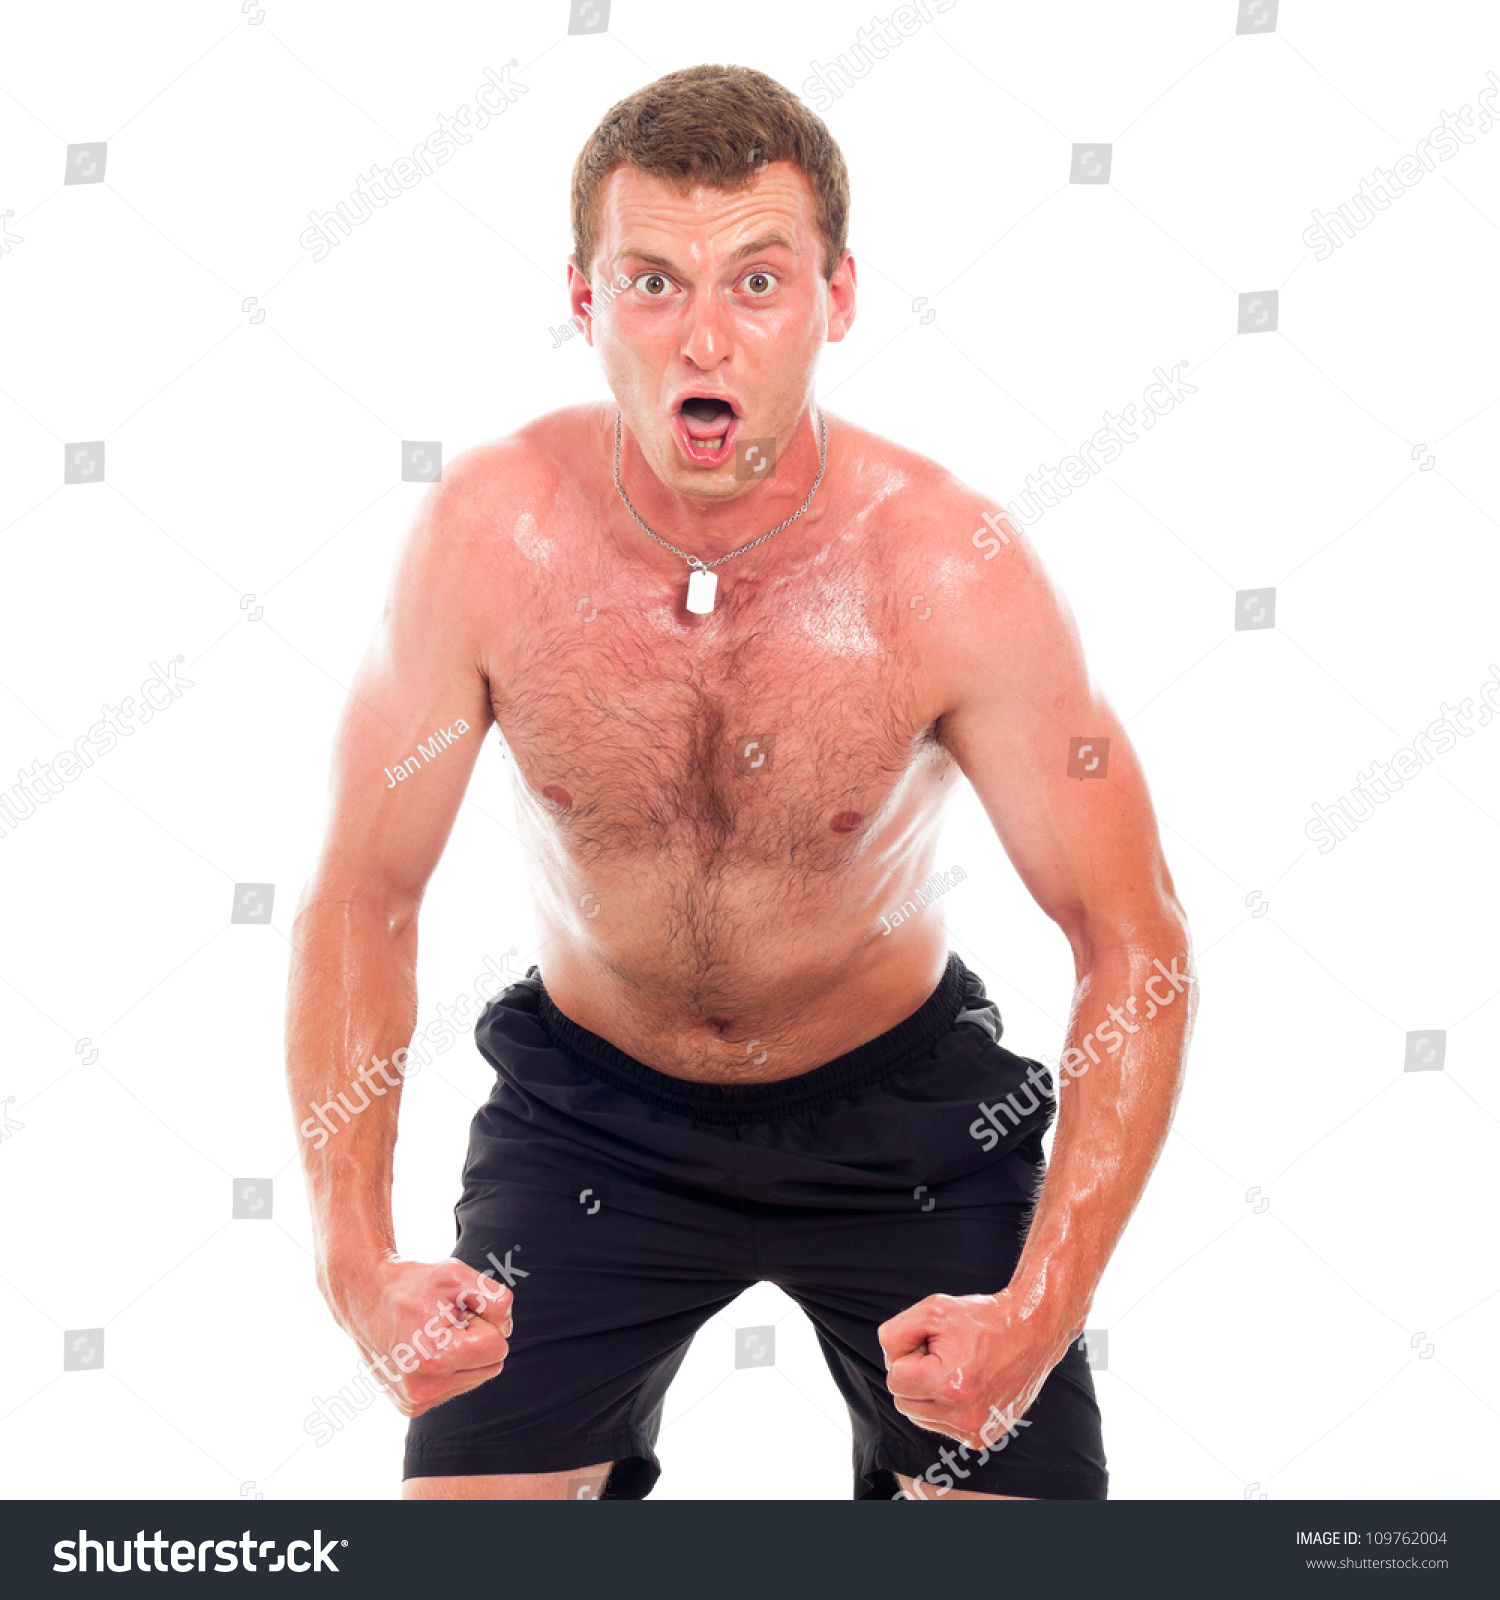 Man With Naked Torso Standing With Dumbbell In Hand Stock 